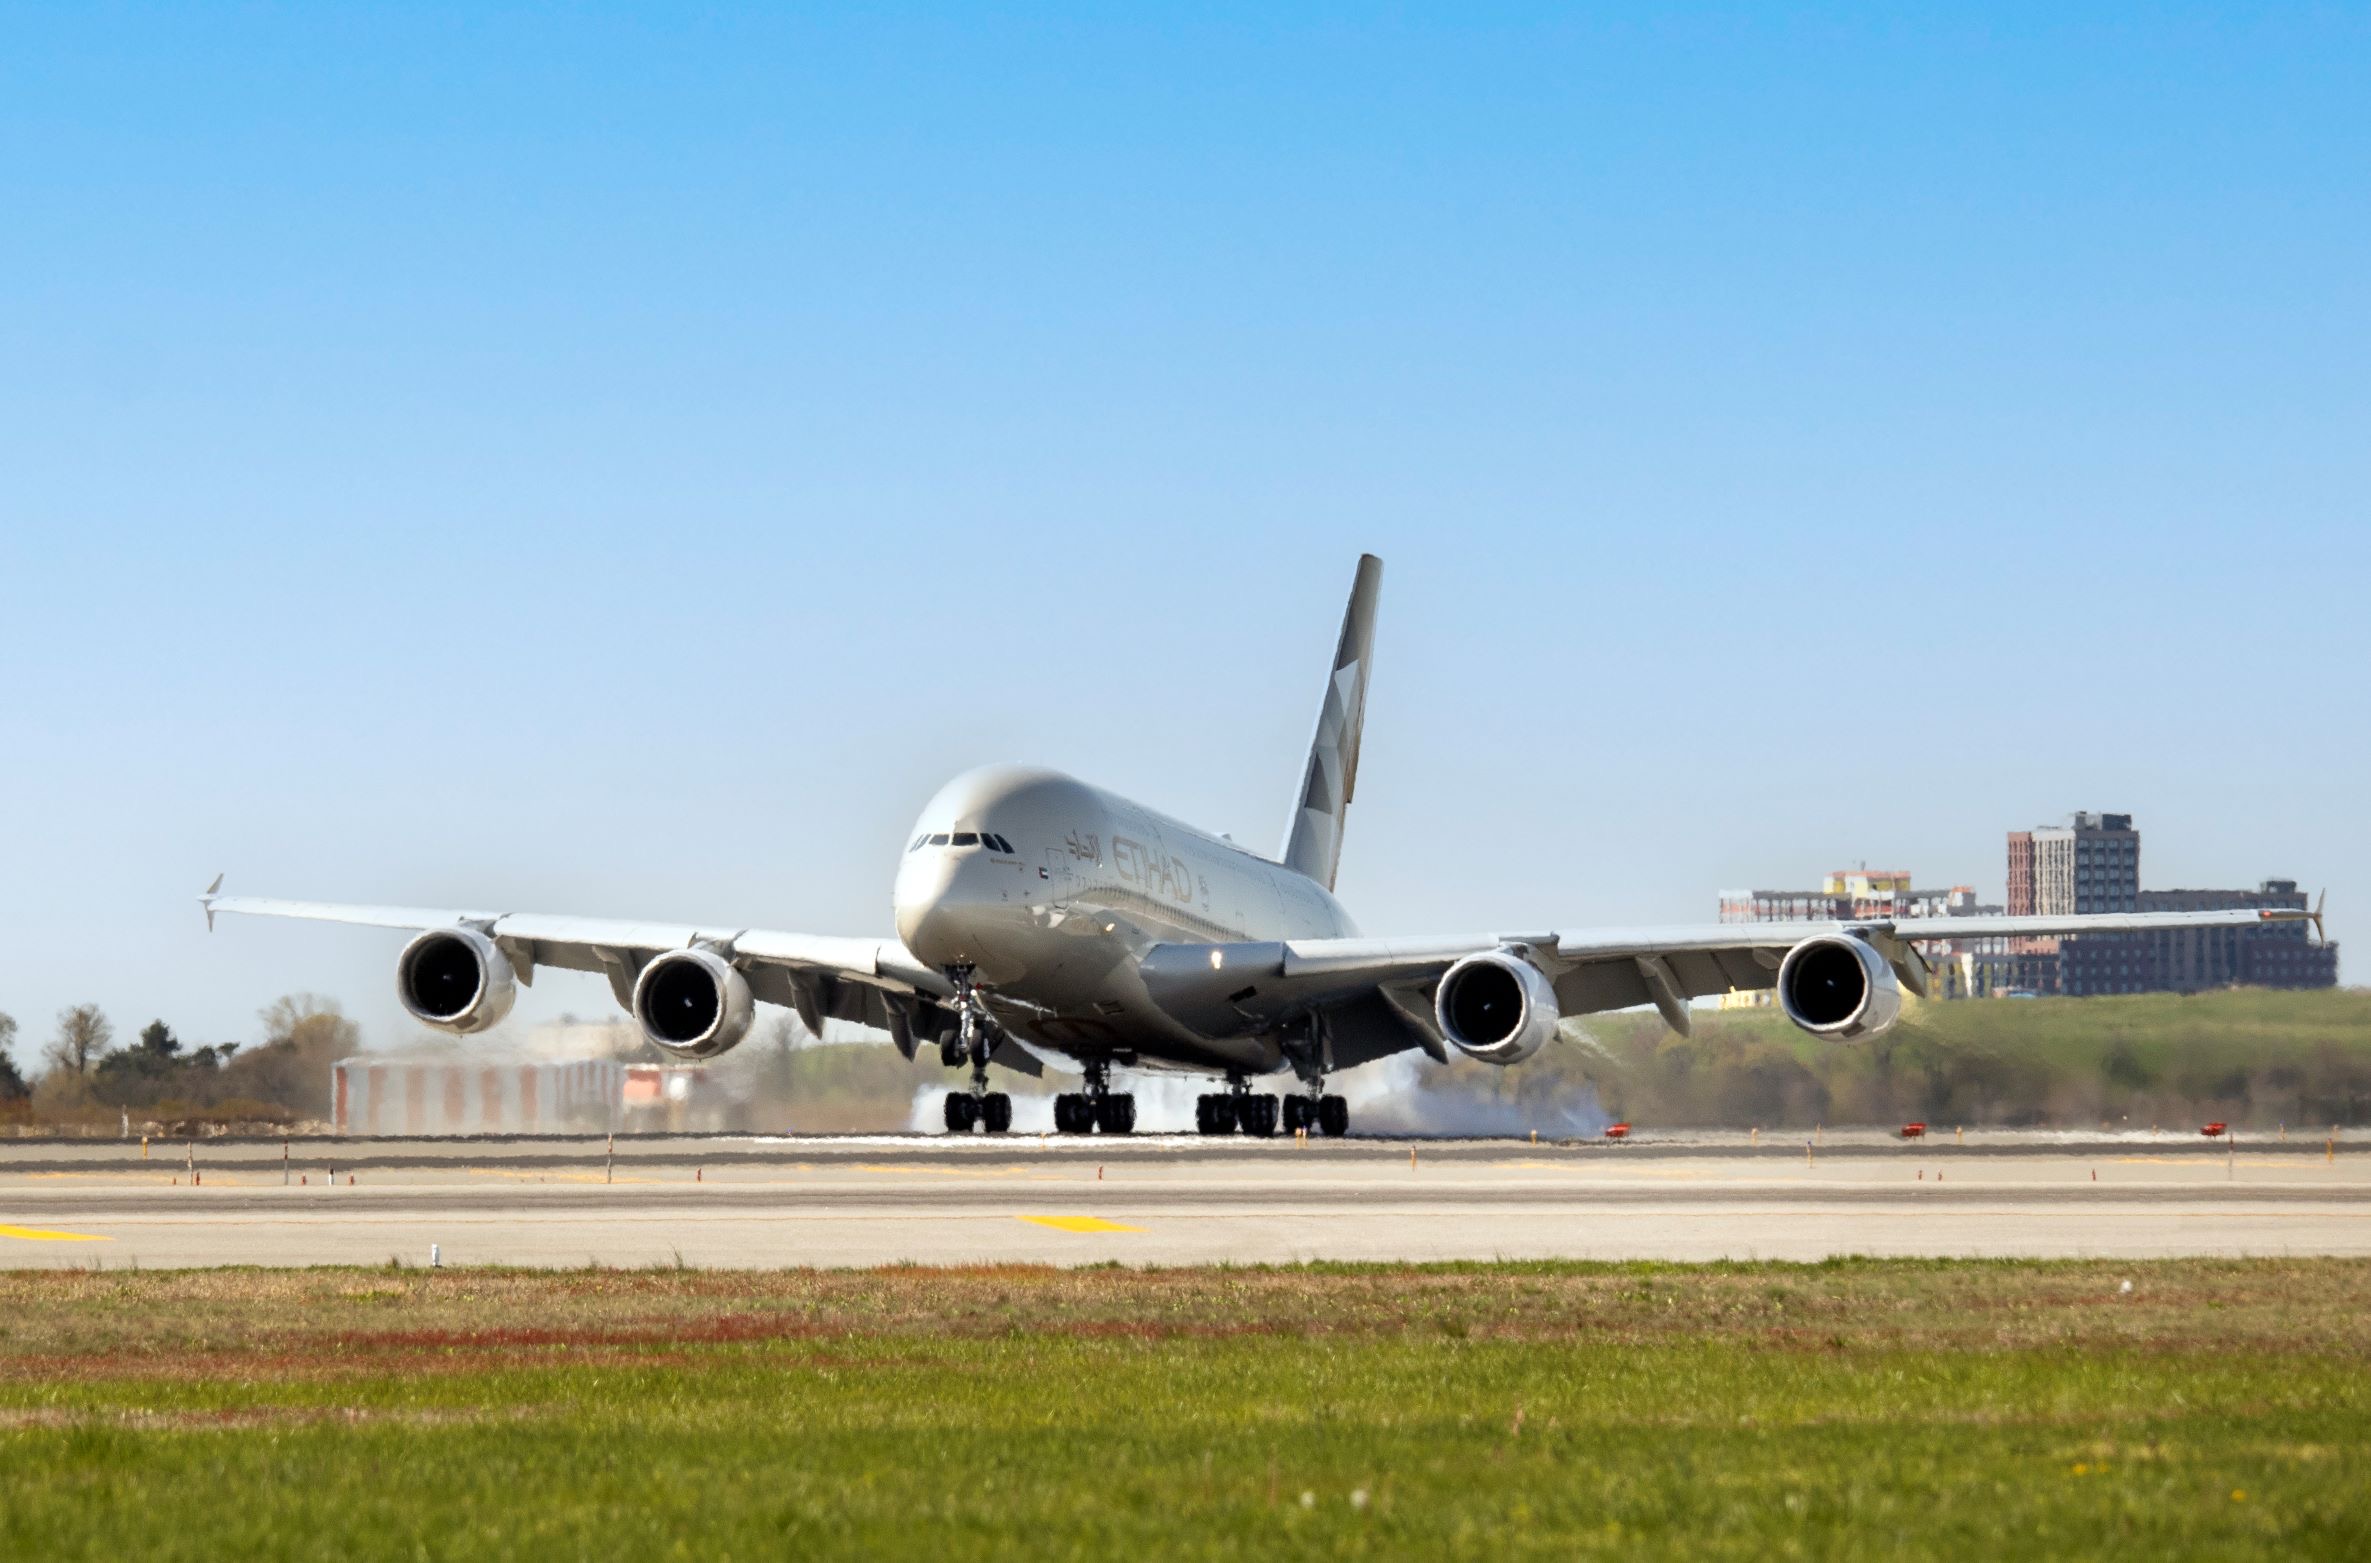 etihad launches 'airbus a380' to new york